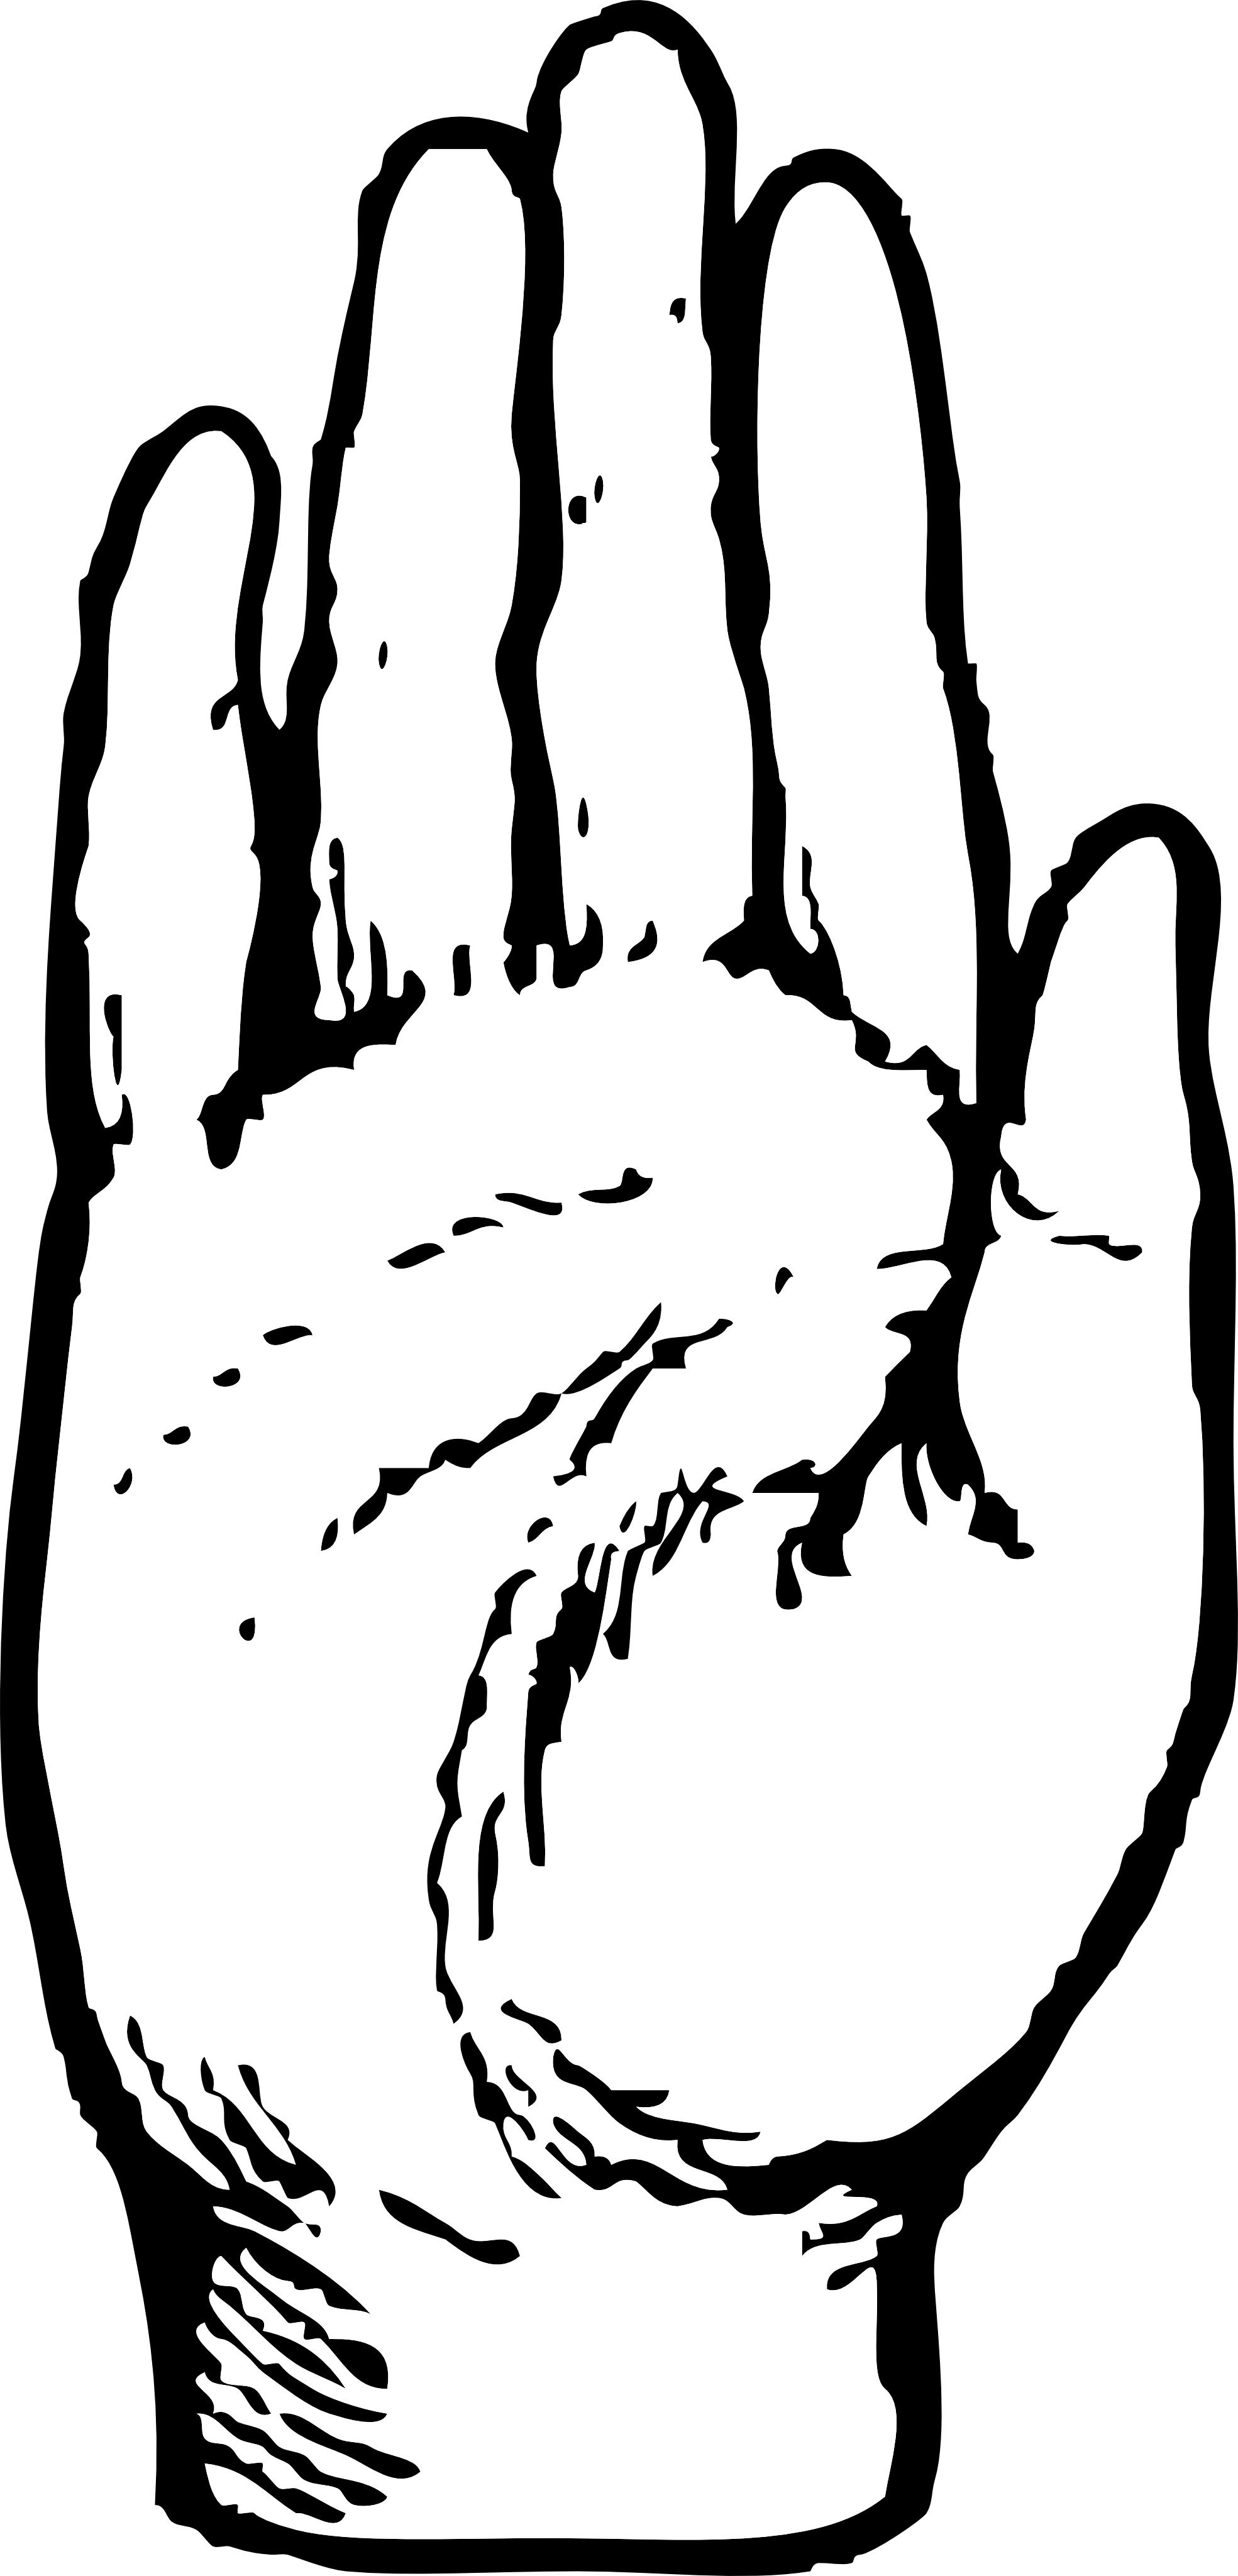 Hands clipart black and white